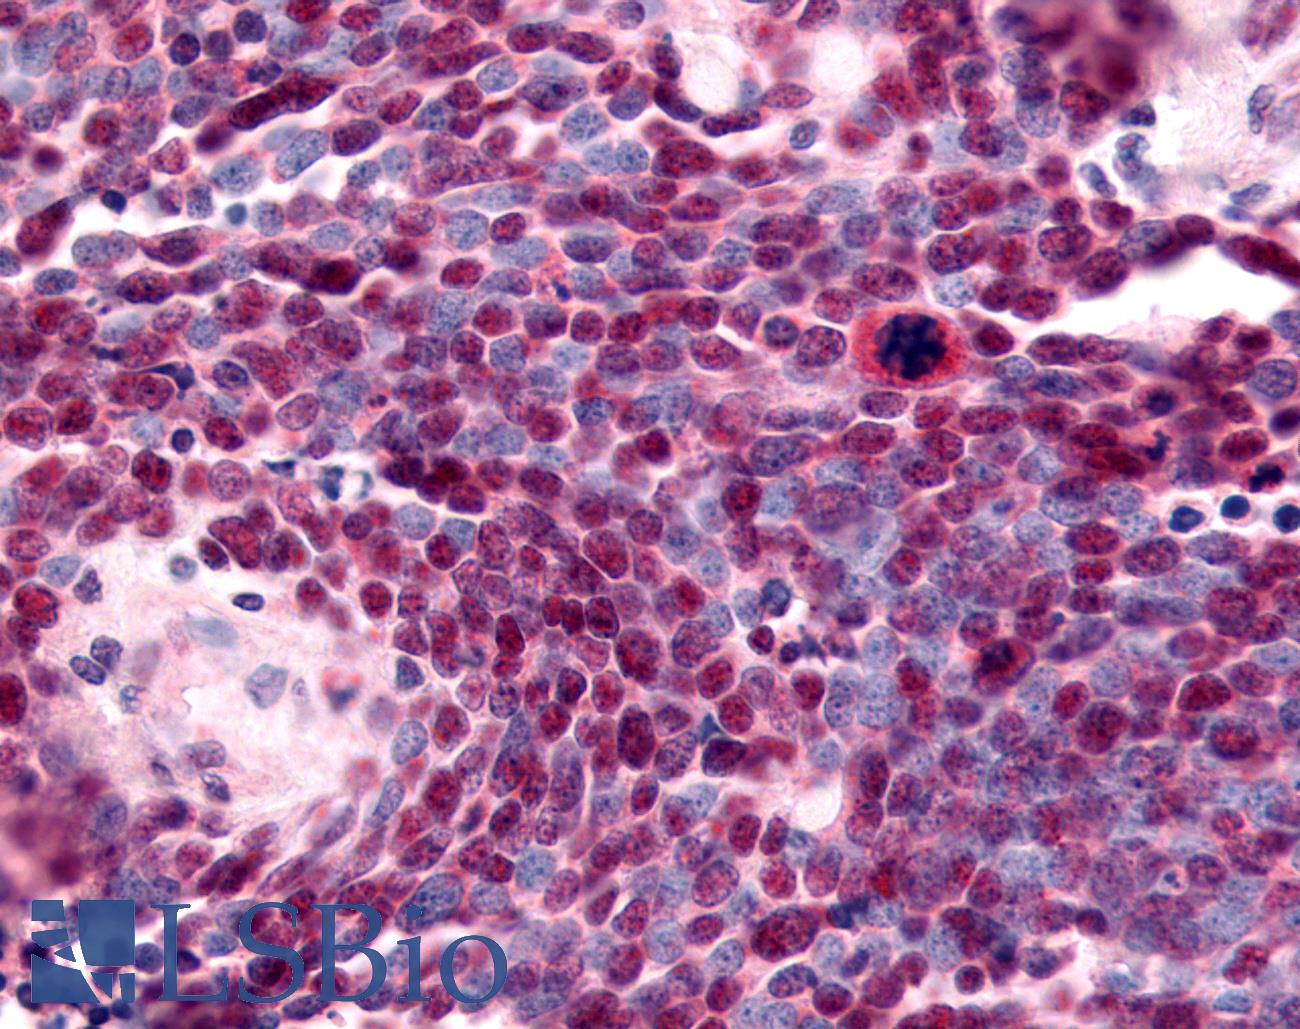 NR2E1 / TLX Antibody - Anti-NR2E1 / TLX antibody IHC of human Lung, Small Cell Carcinoma. Immunohistochemistry of formalin-fixed, paraffin-embedded tissue after heat-induced antigen retrieval.